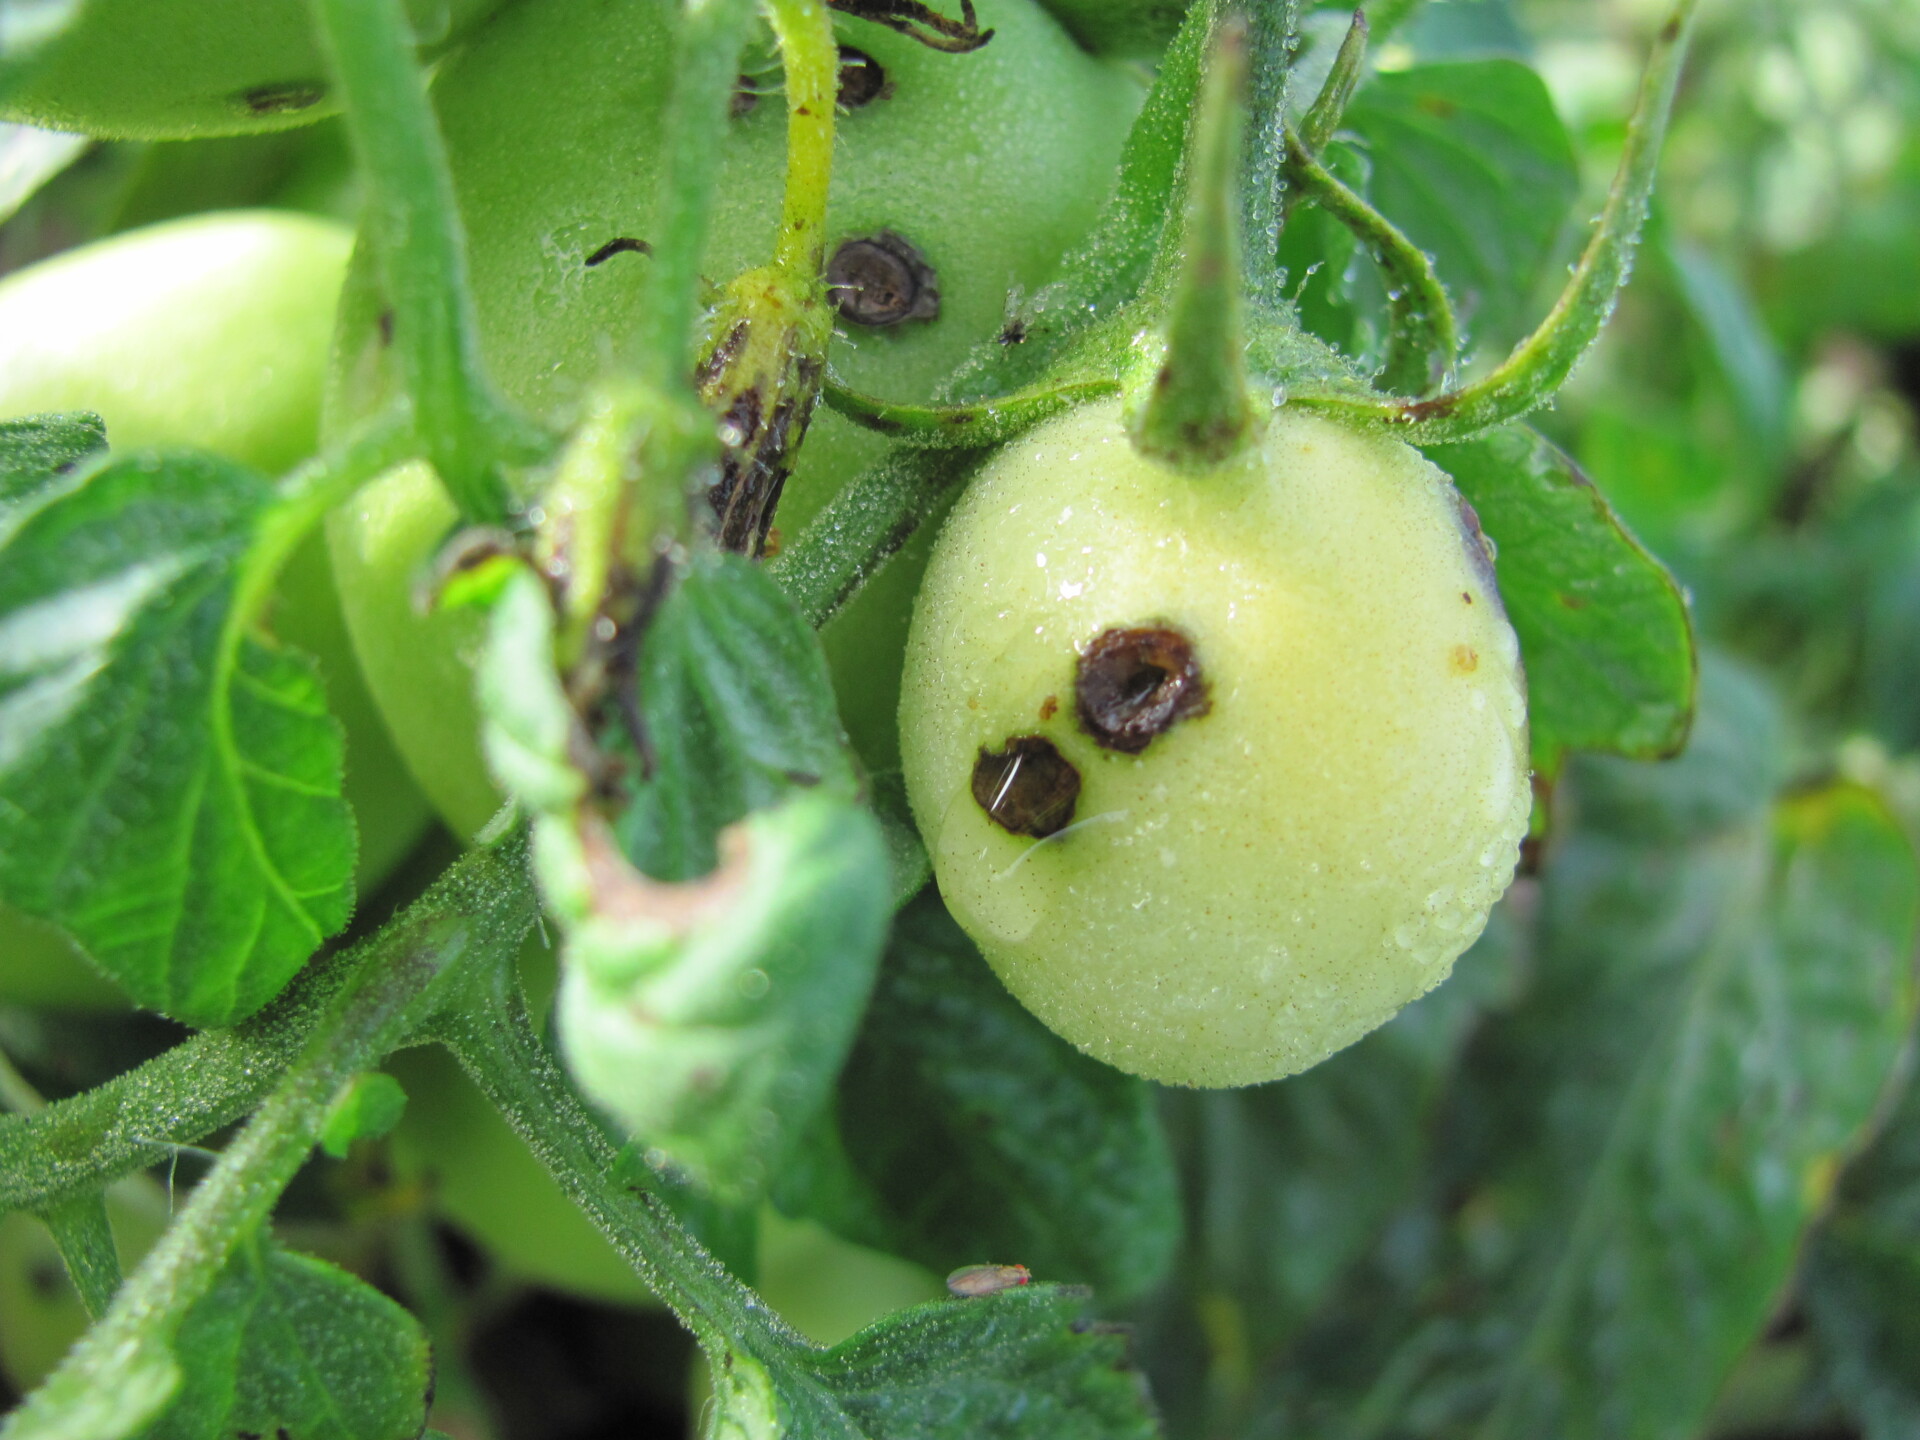 Figure 5. Bacterial spot lesions on fruit that is still wet with dew.